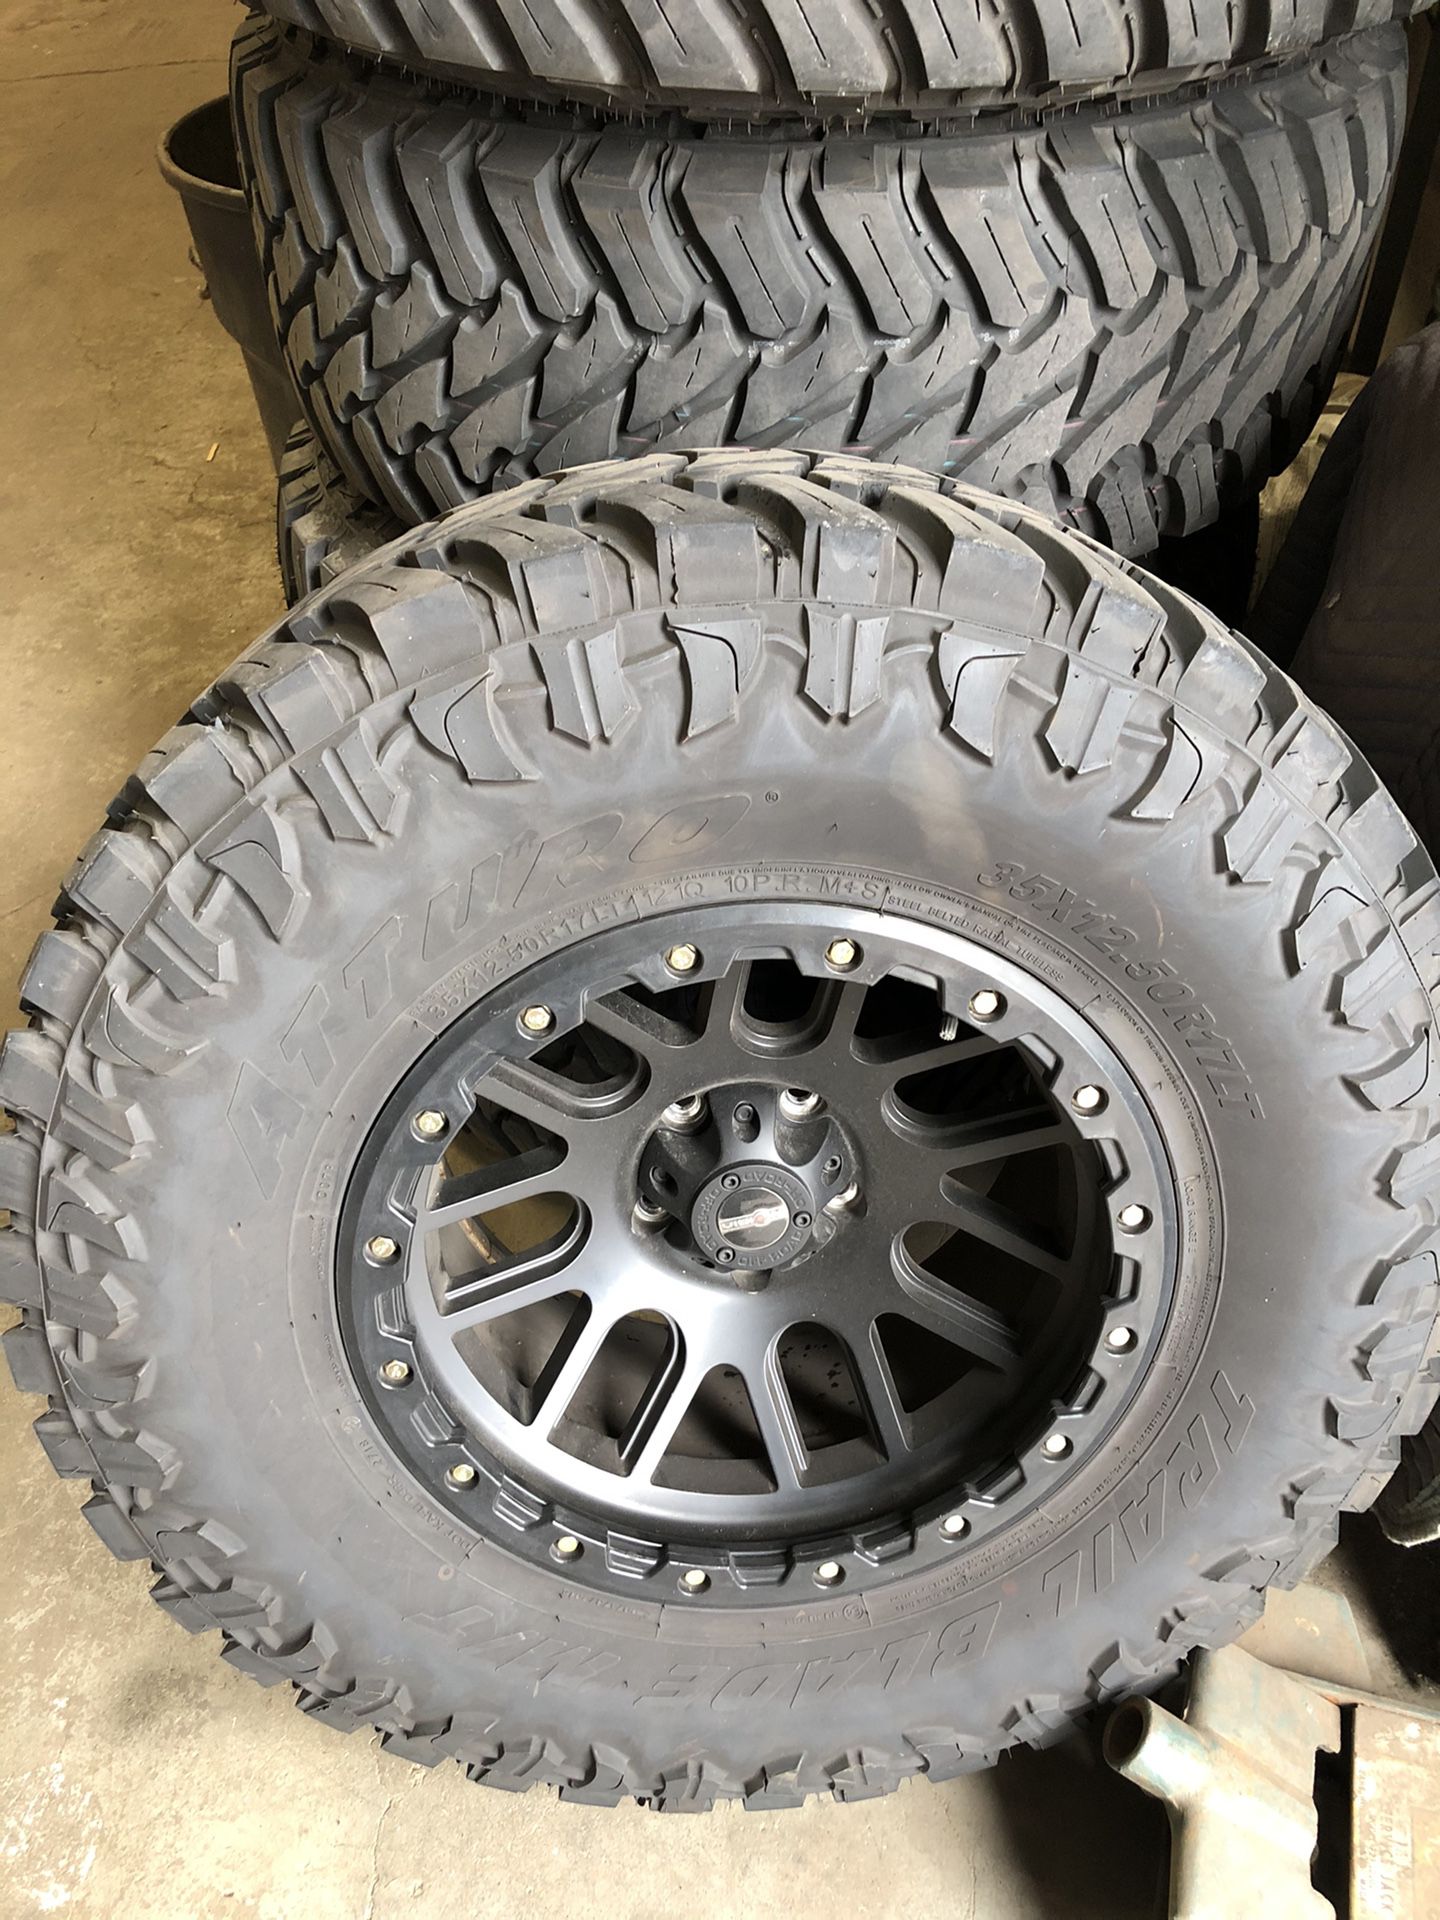 Jeep Wrangler jk off-road tires and 3” life kit